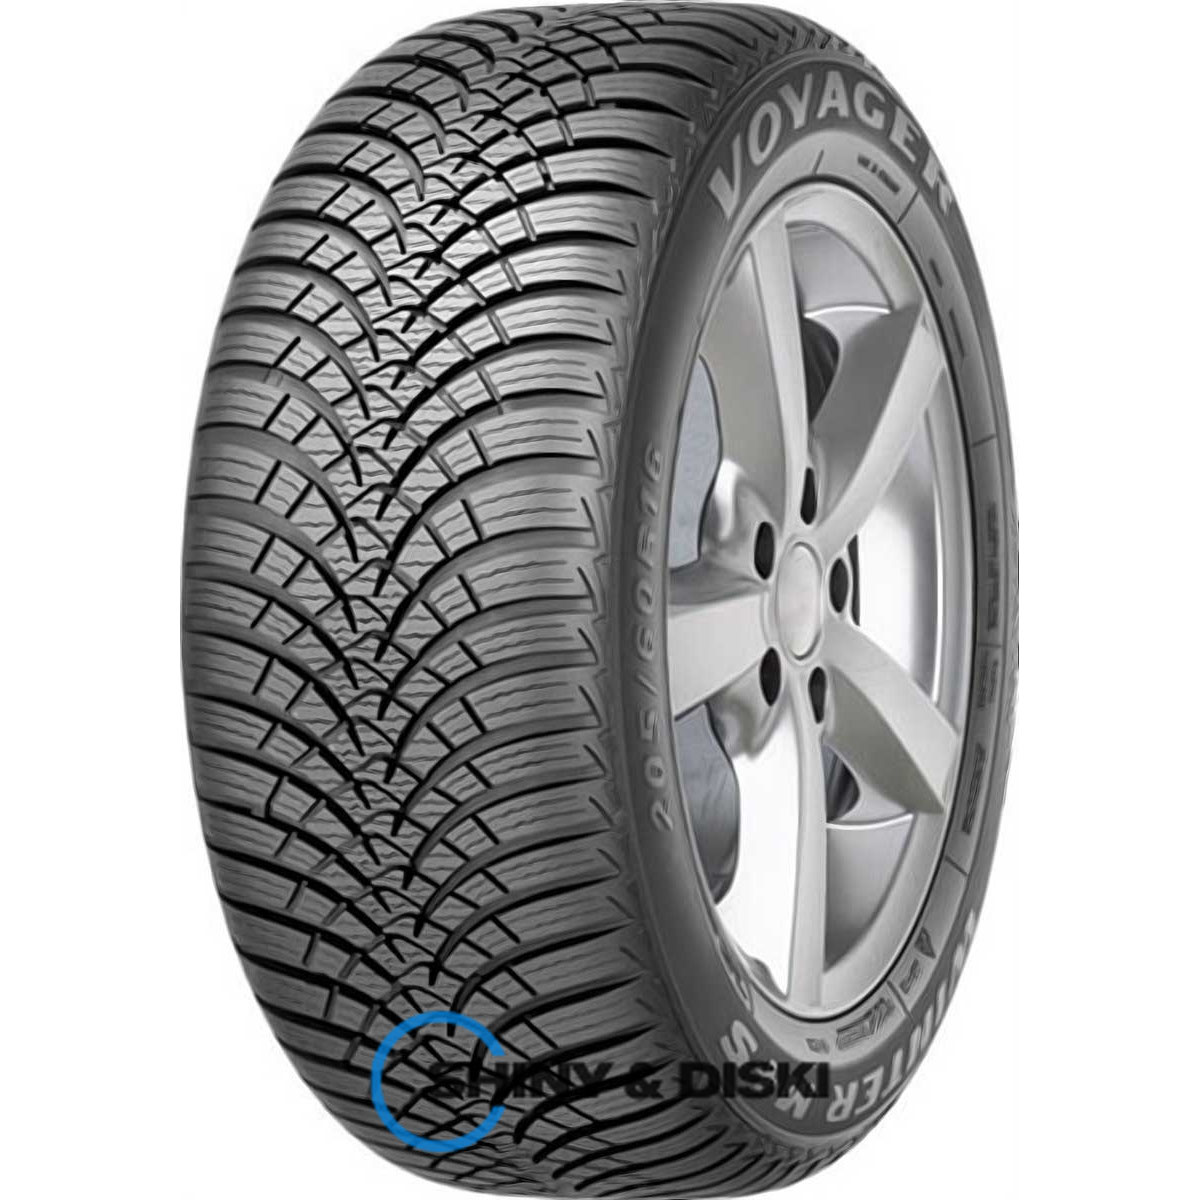 voyager winter 185/55 r15 82t